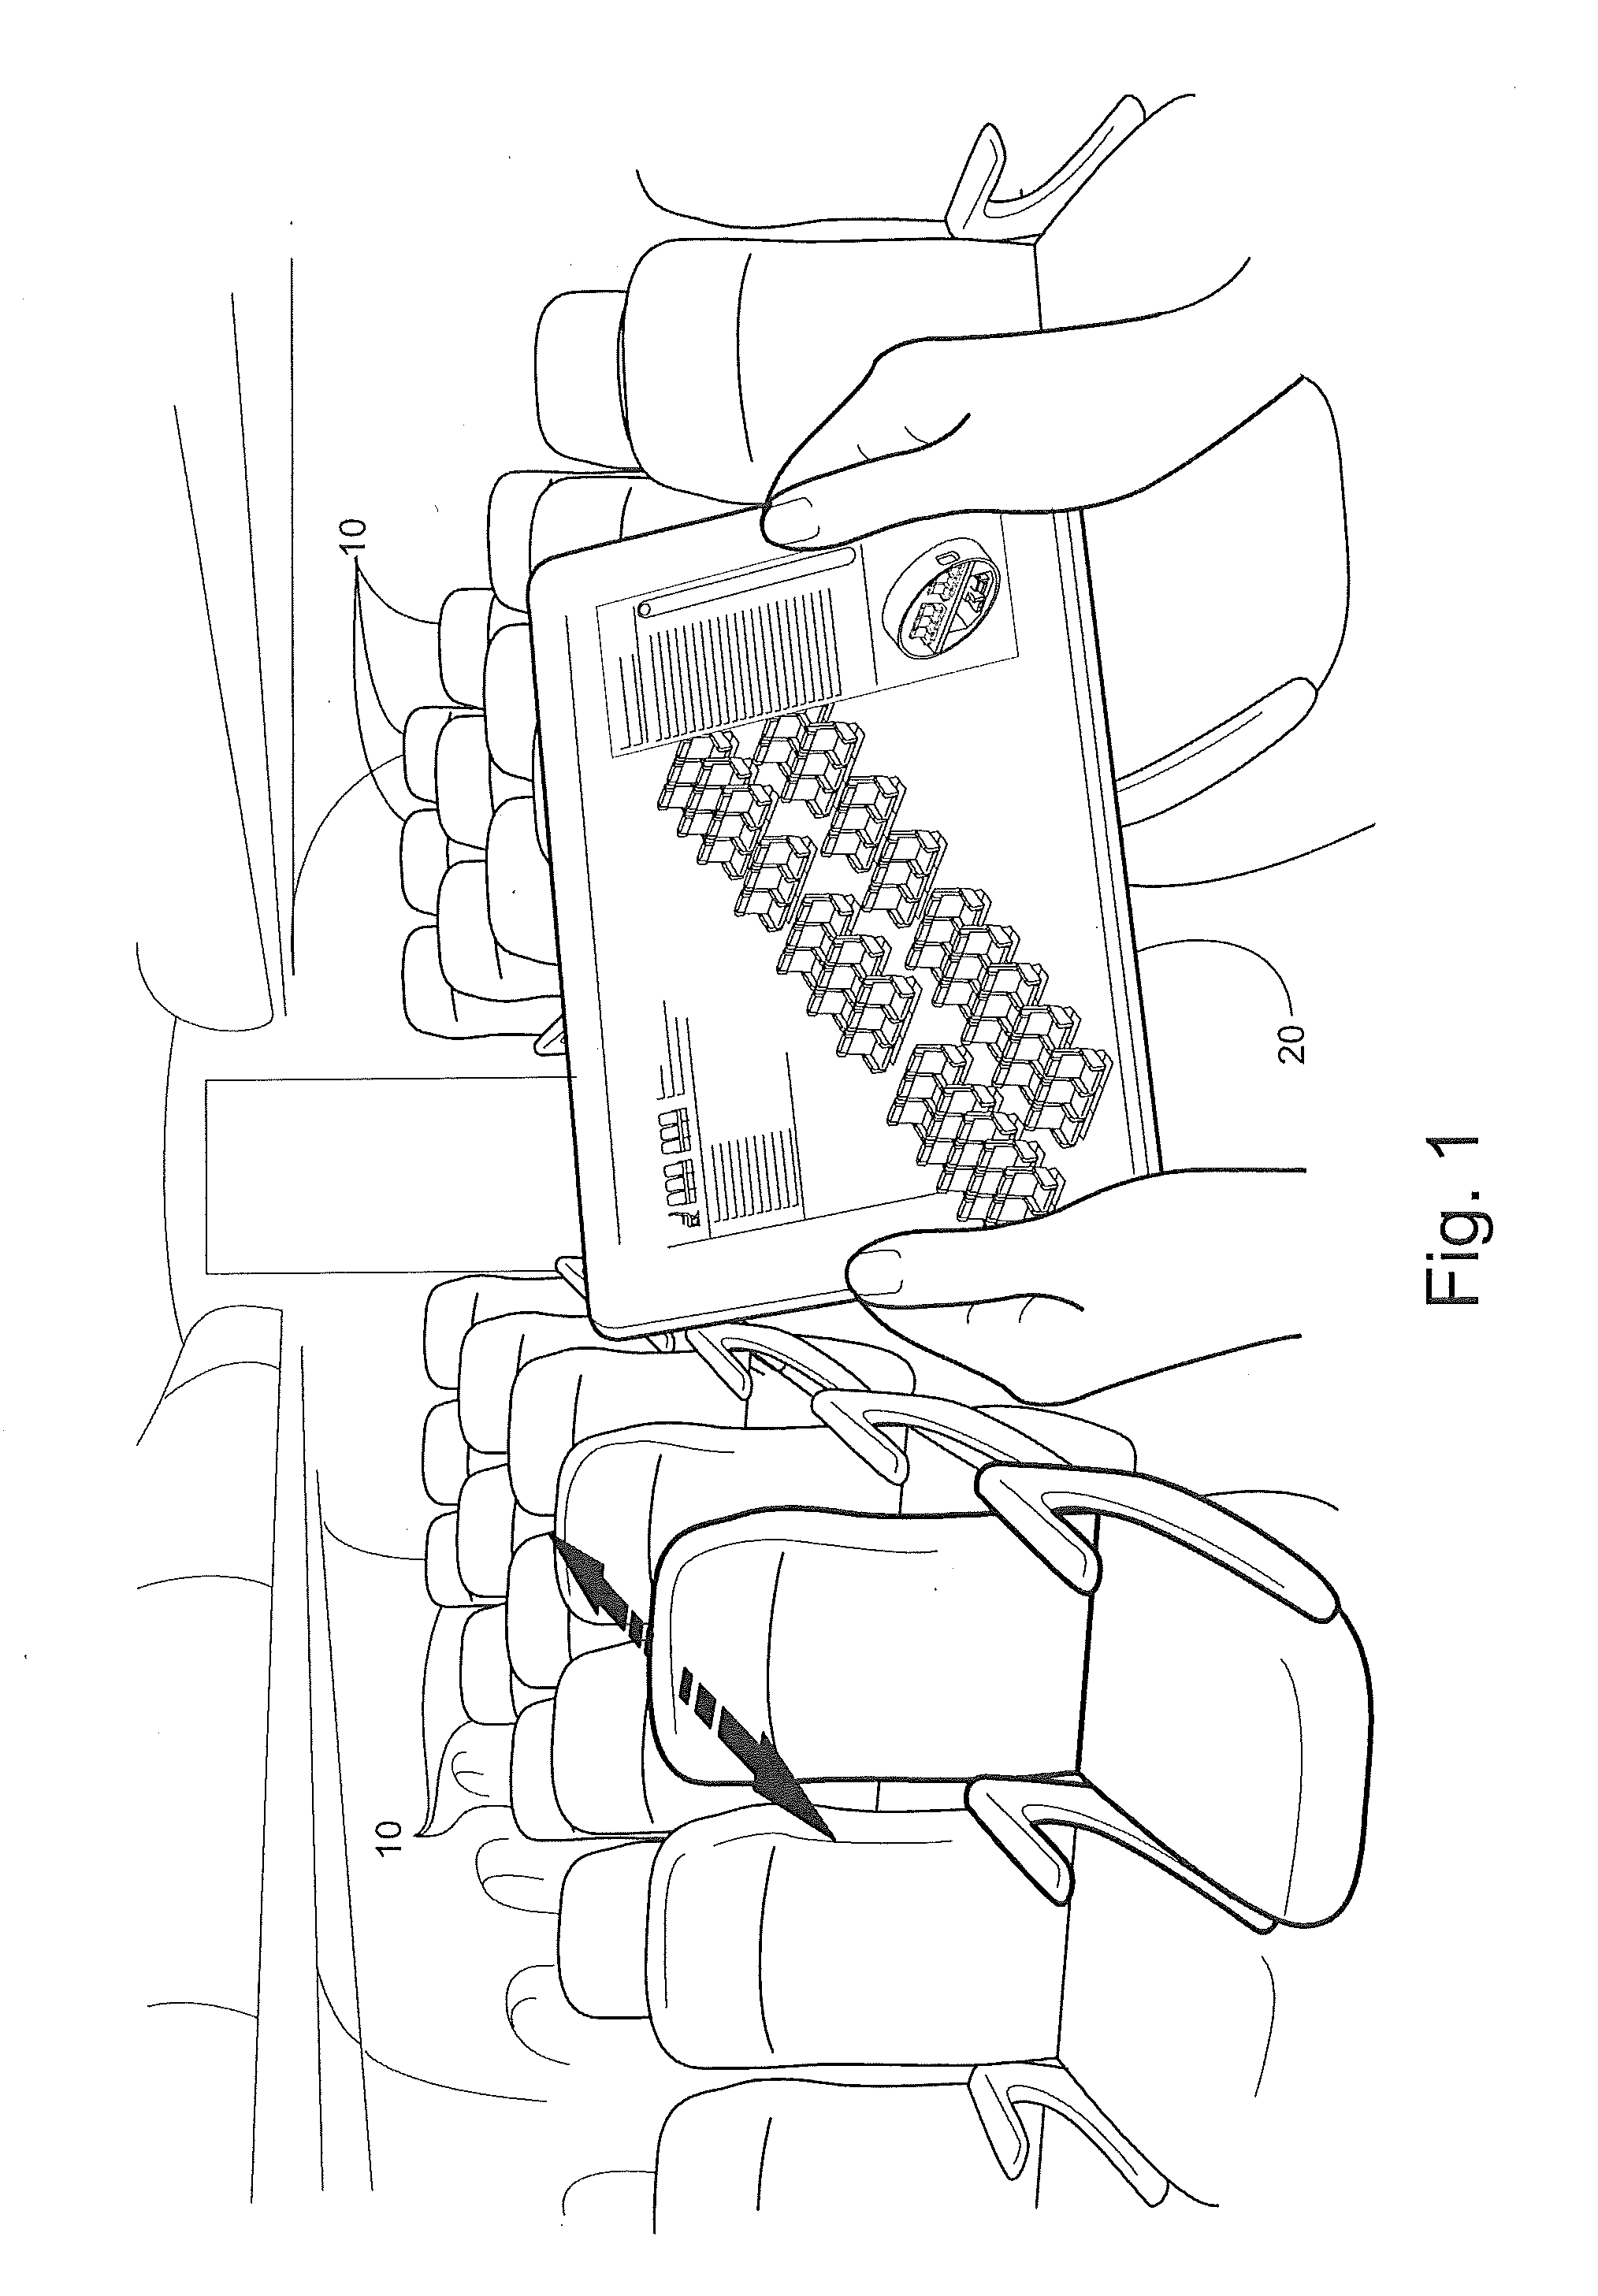 Method and apparatus for adjusting the spacing of vehicle seats based on the size of the seat occupant